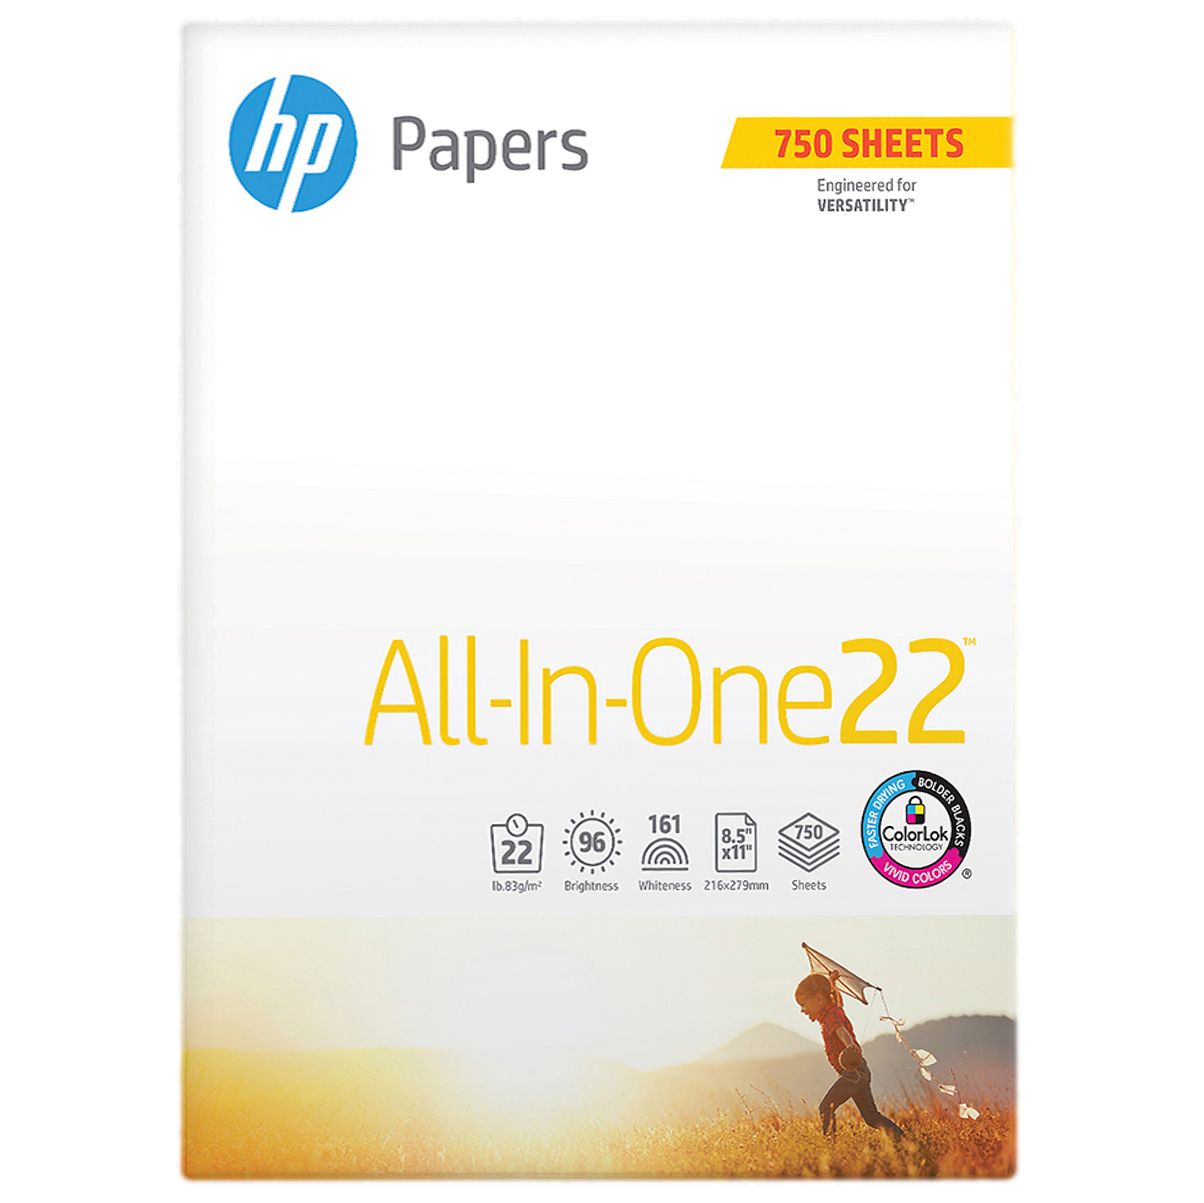 HP All-In-One Printing Paper, 96 Brightness, 22 lb., Letter, 1 Ream, 750 Sheets